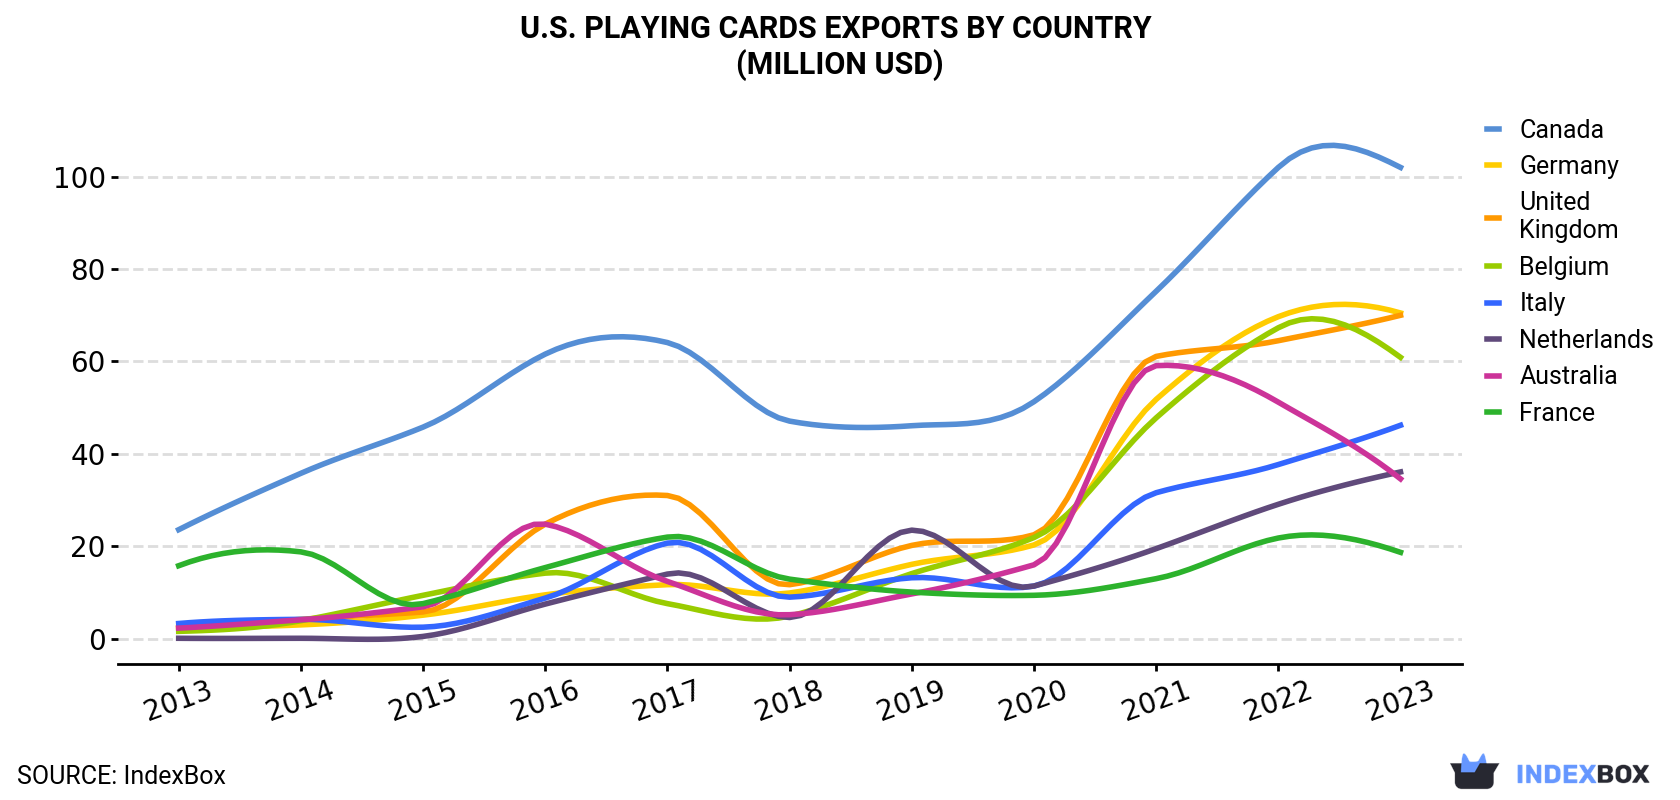 U.S. Playing Cards Exports By Country (Million USD)